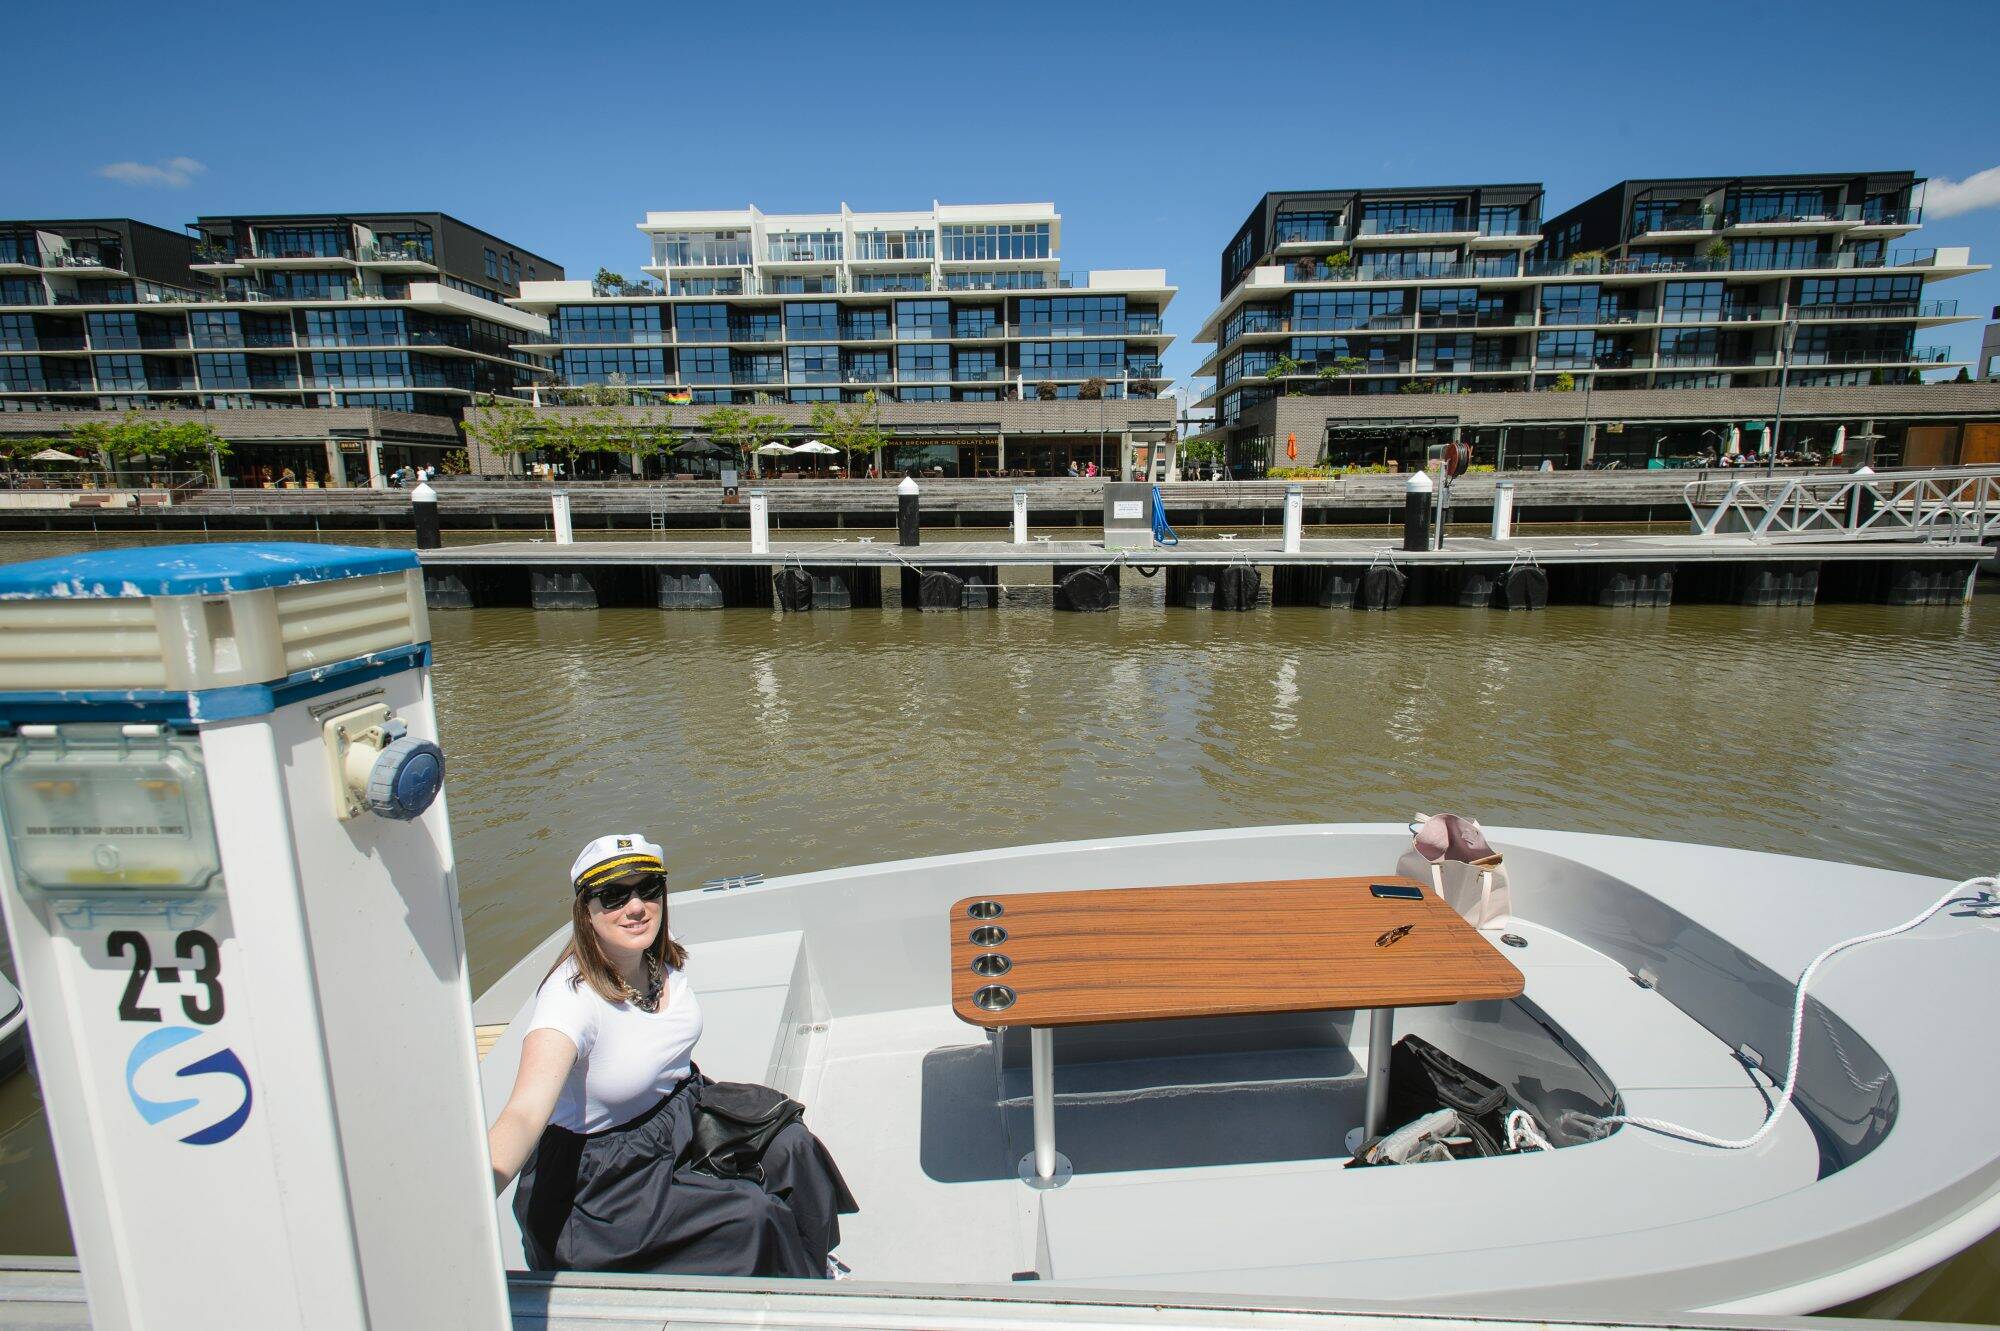 GoBoat Canberra self-drive picnic boats have arrived on Lake Burley Griffin, The Canberra Times